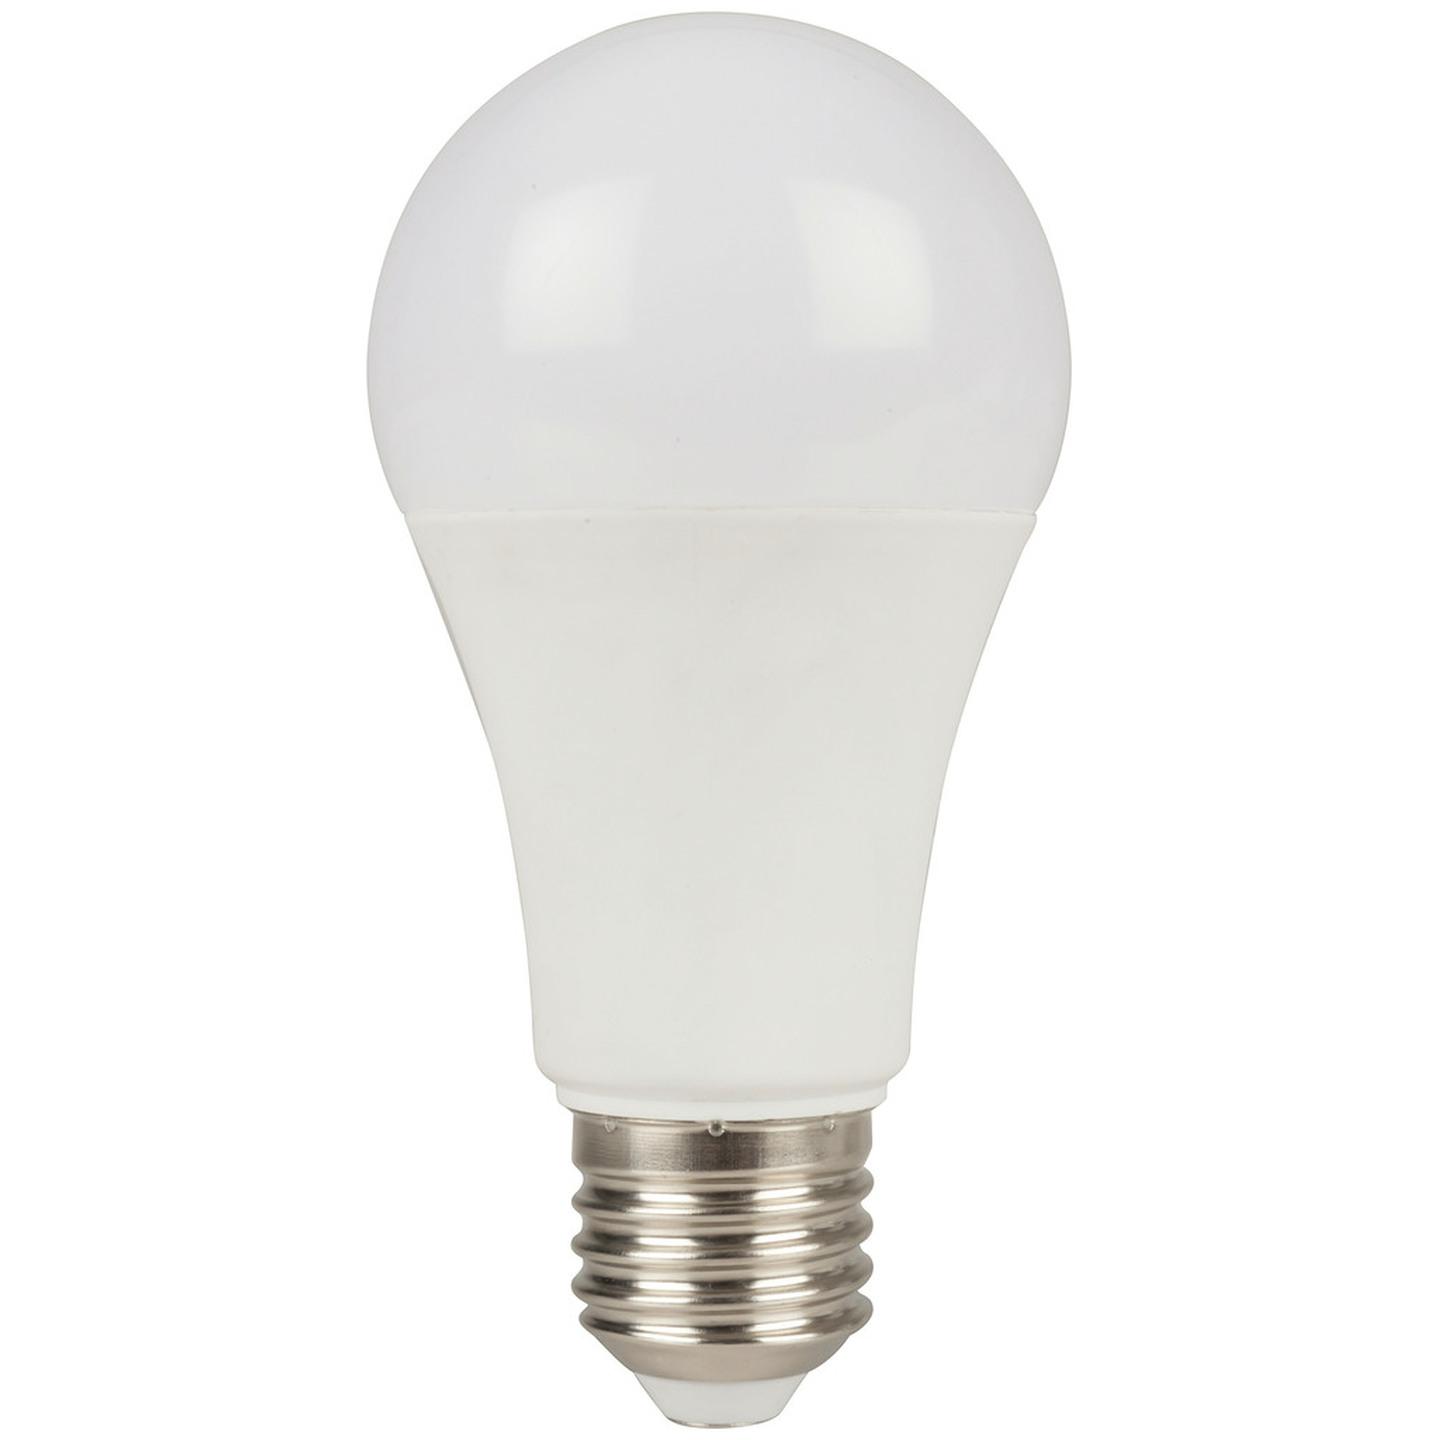 Smart Wi-Fi LED Bulb with Colour Change with Edison Light Fitting